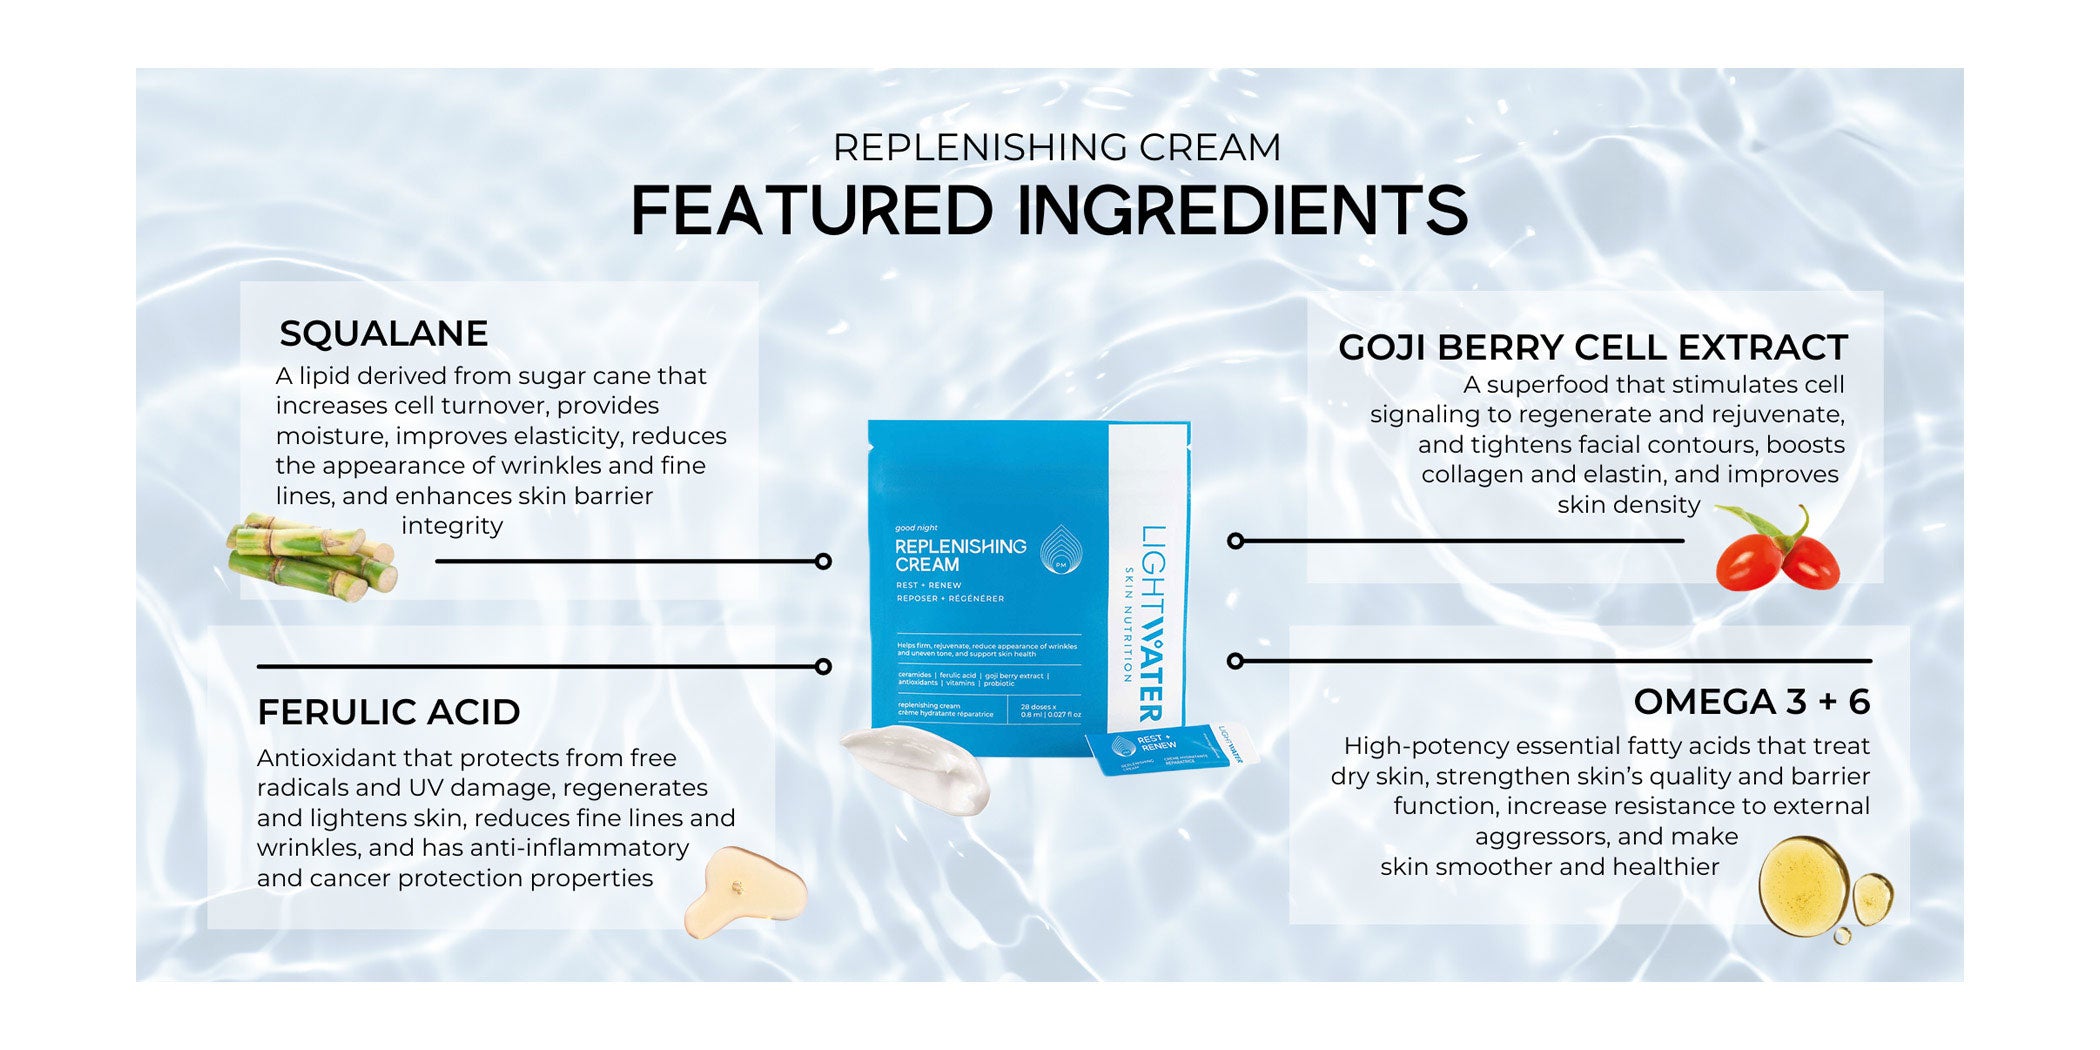 LightWater PM Replenishing Cream features Squalane, Omega 3 and 6, Goji Berry Cell Extract, and Ferulic Acid